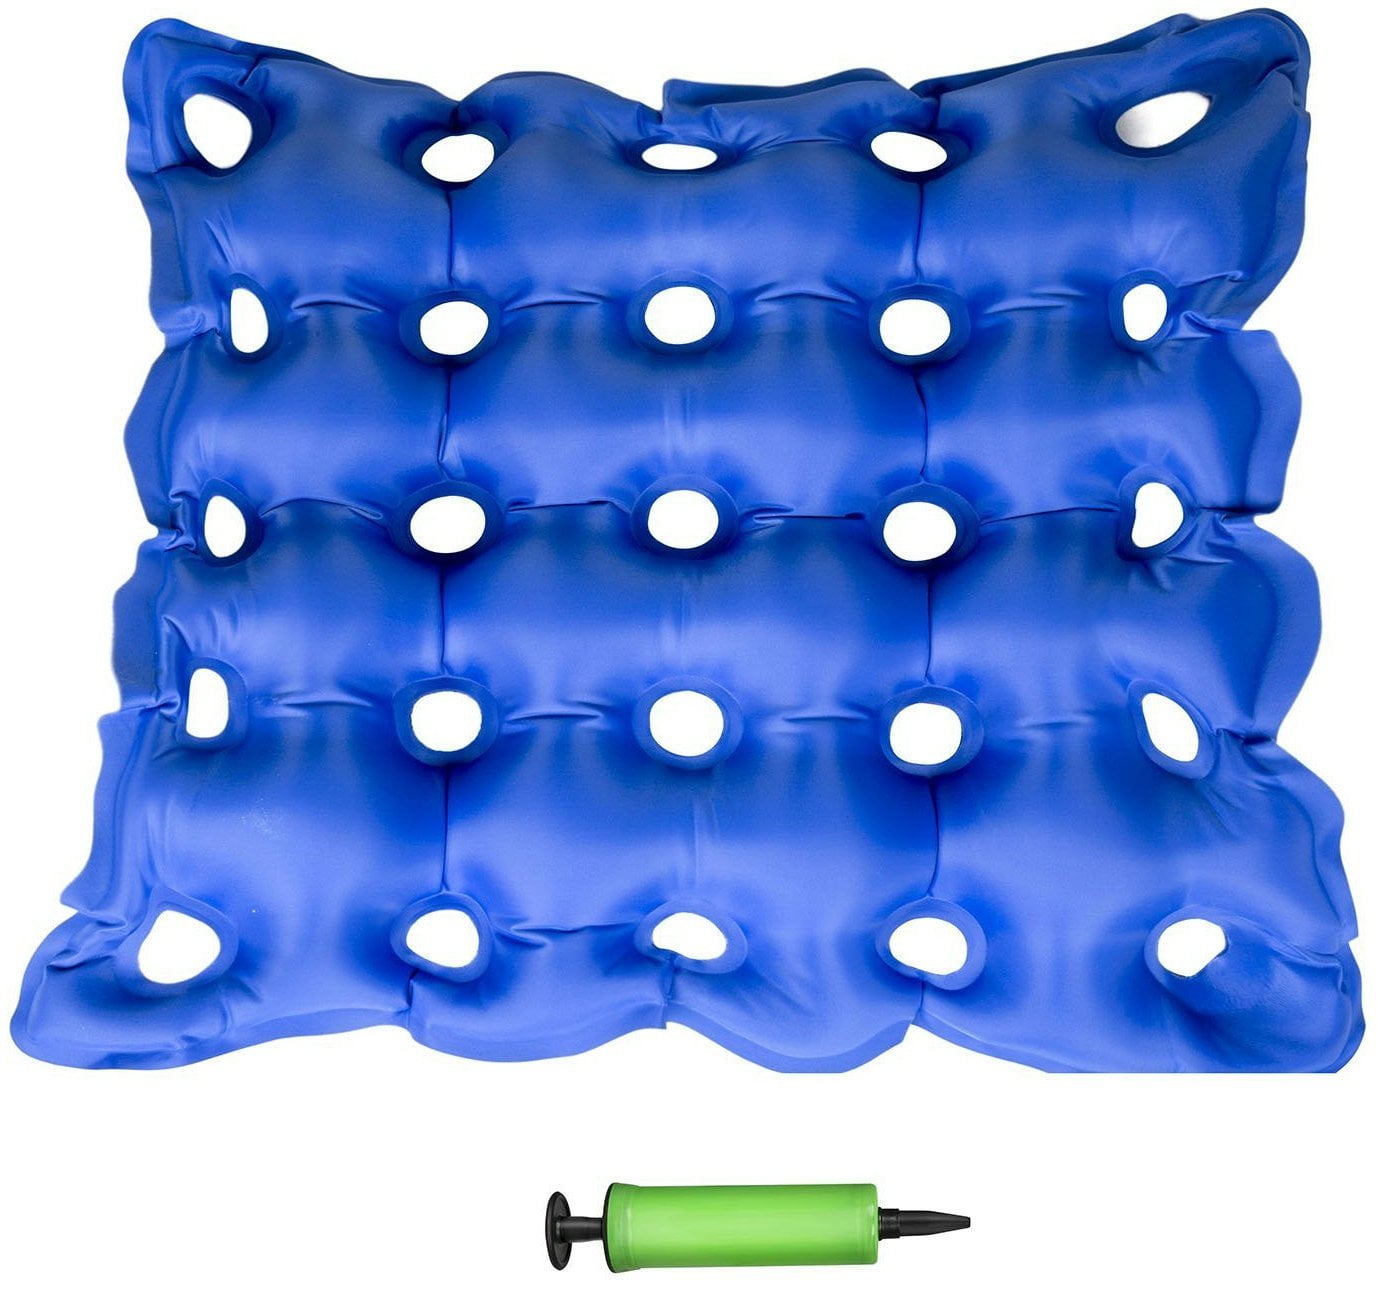 MIAOKE Medical Air Inflatable Seat Cushion for Wheelchair Office Home,  Ideal for Prolonged Sitting 17.7 X 17.7- Blue